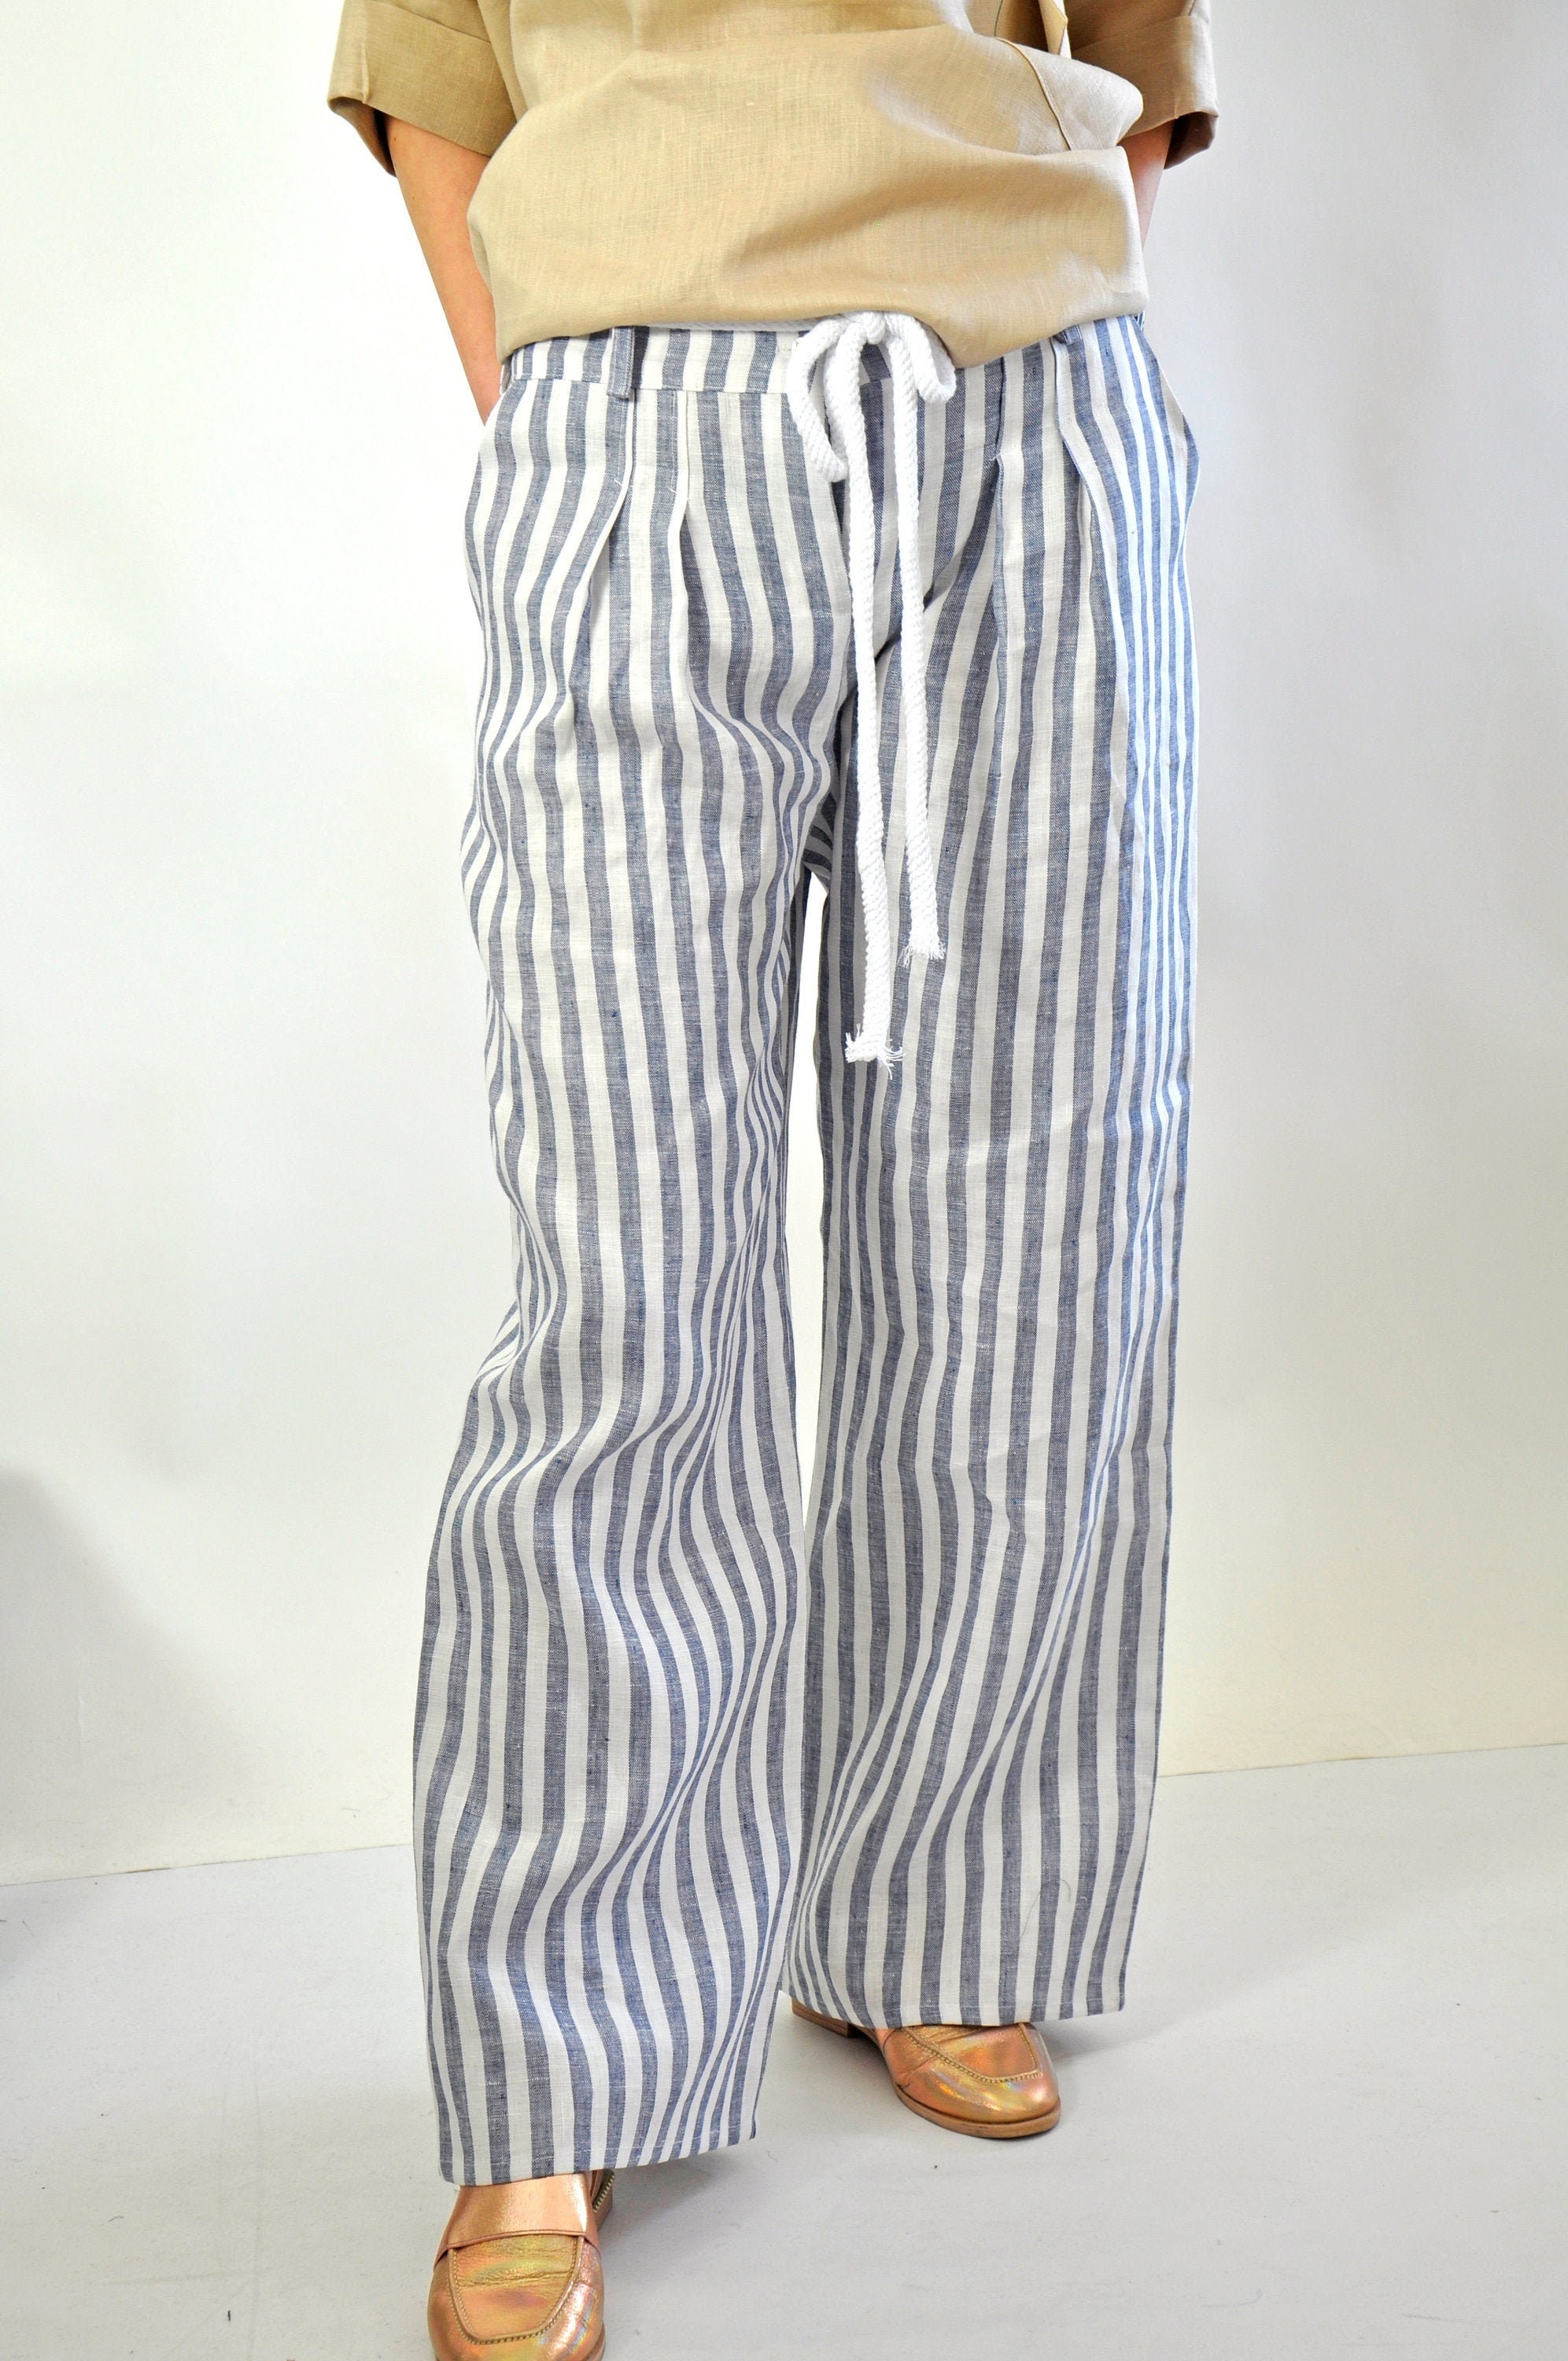 Wide Legged Linen Trousers With Belt and Pockets, High Waisted Pants,  Summer Palazzo Pants, Beach Pants for Women, Striped Pants for Ladies -  Etsy UK